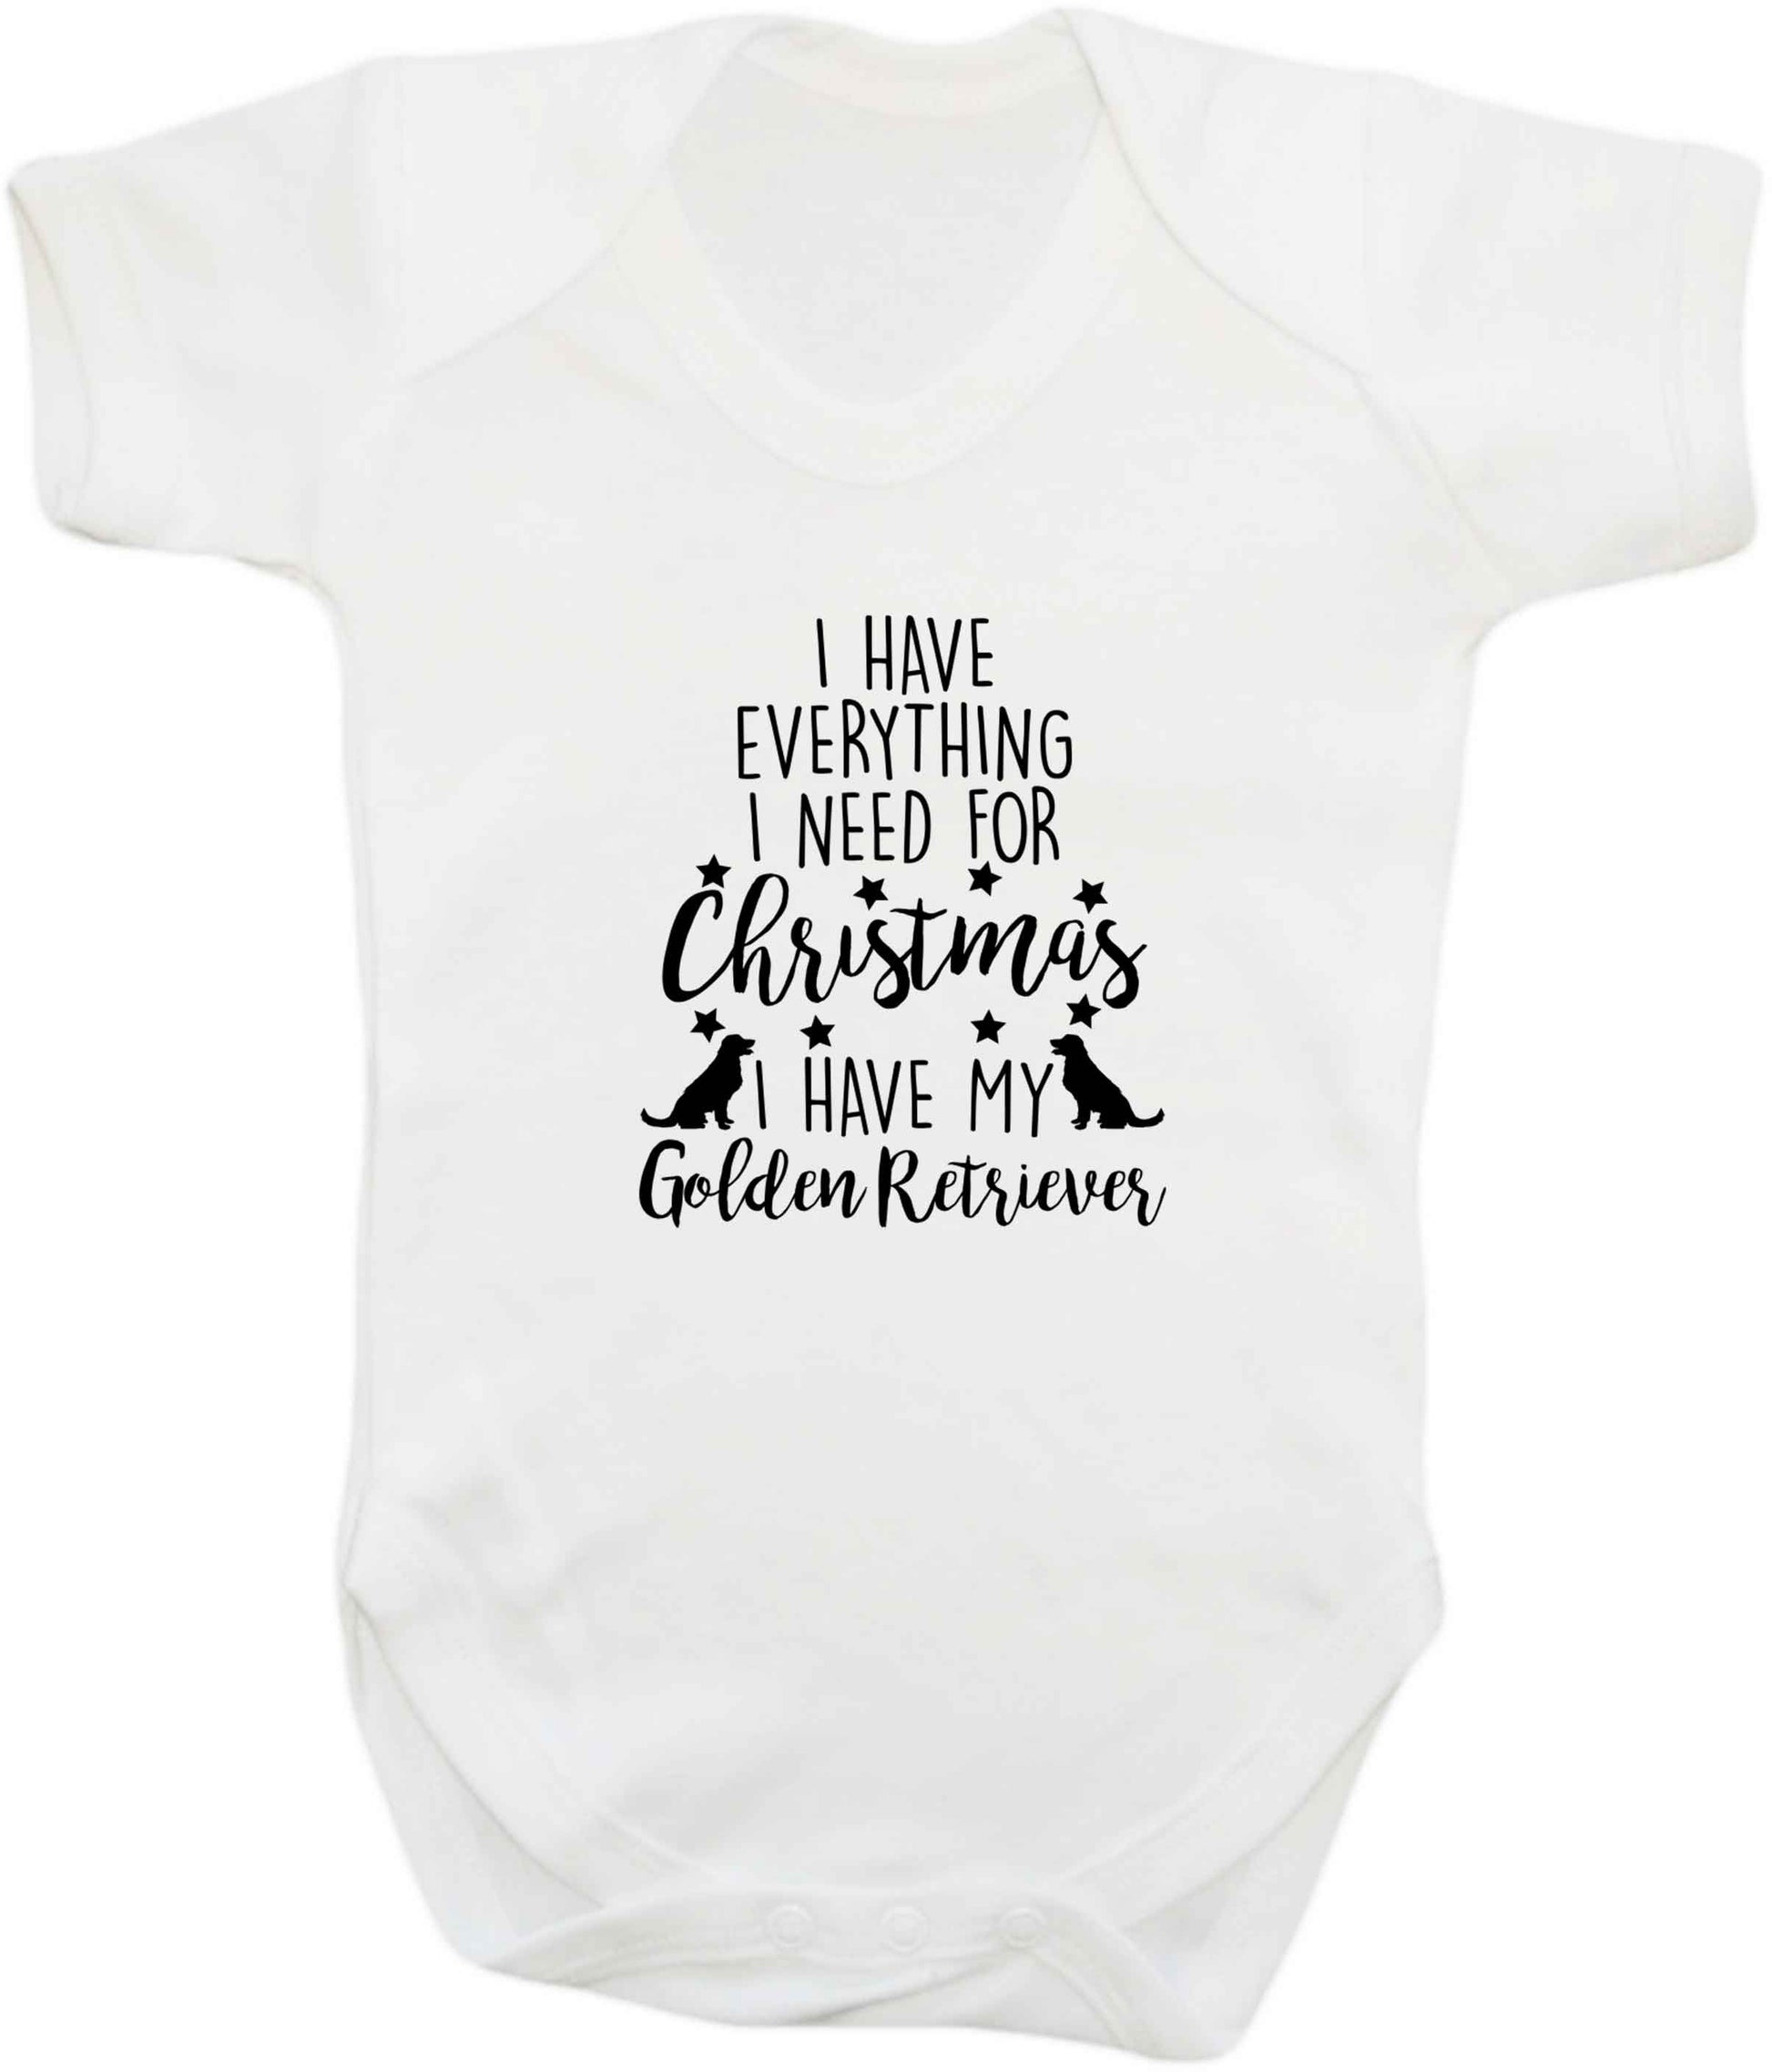 I have everything I need for Christmas I have my golden retriever baby vest white 18-24 months